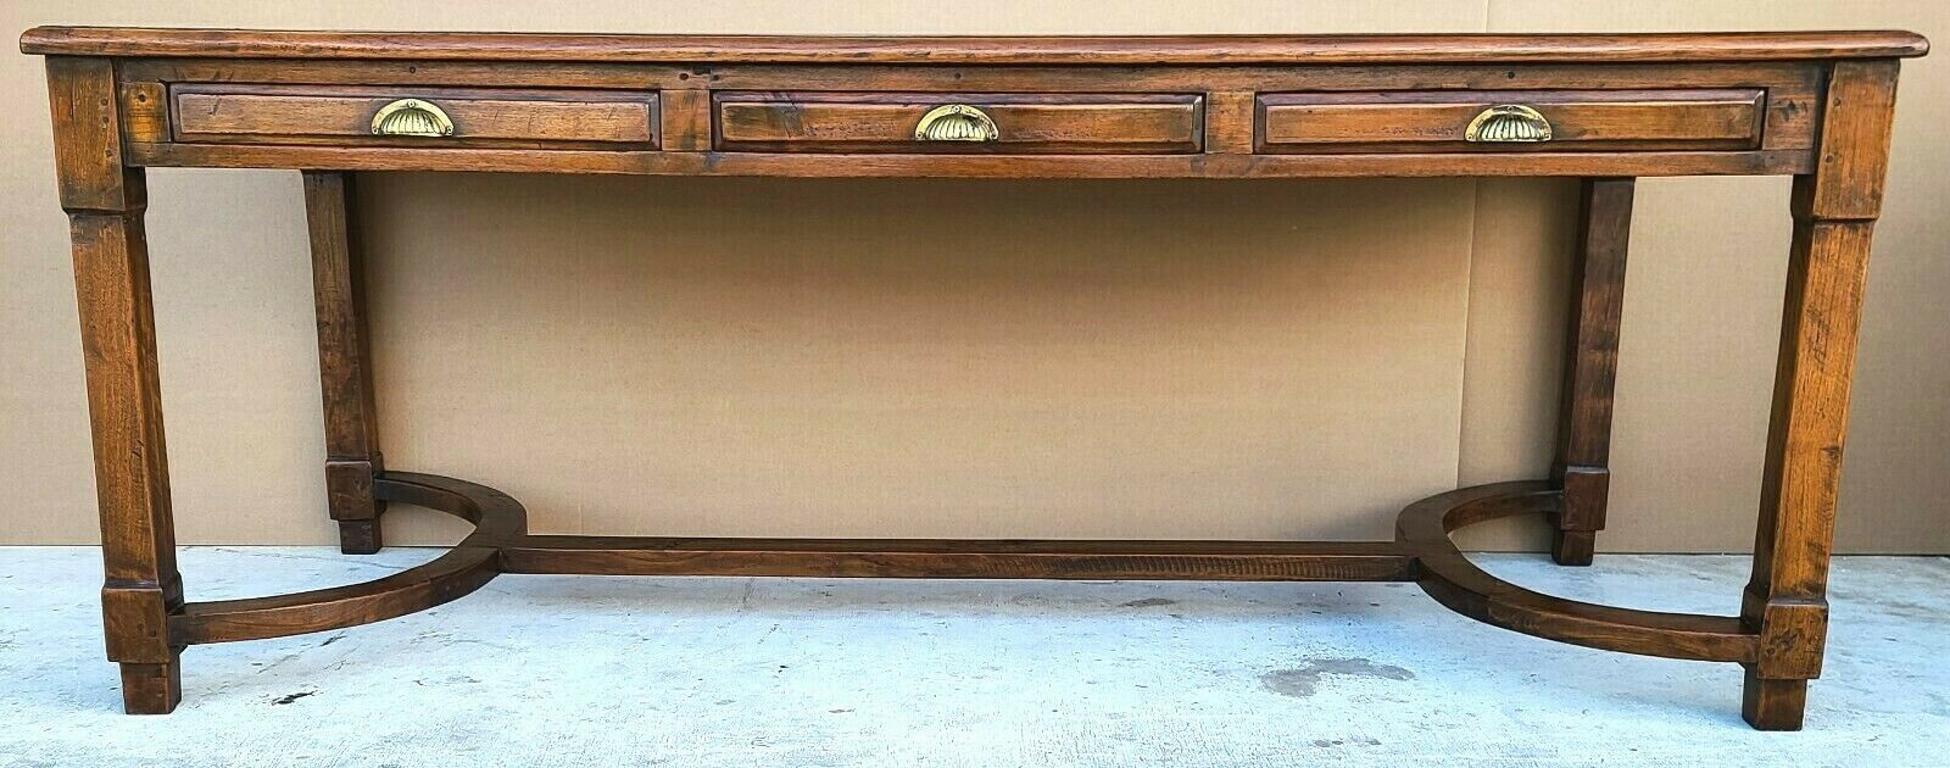 Offering one of our Recent Palm Beach Estate Fine Furniture Acquisitions of a
Antique 1800s solid oak library dining table with 6 drawers (3 on each side)
This is a true library table with 3 drawers on each side.

Approximate Measurements in